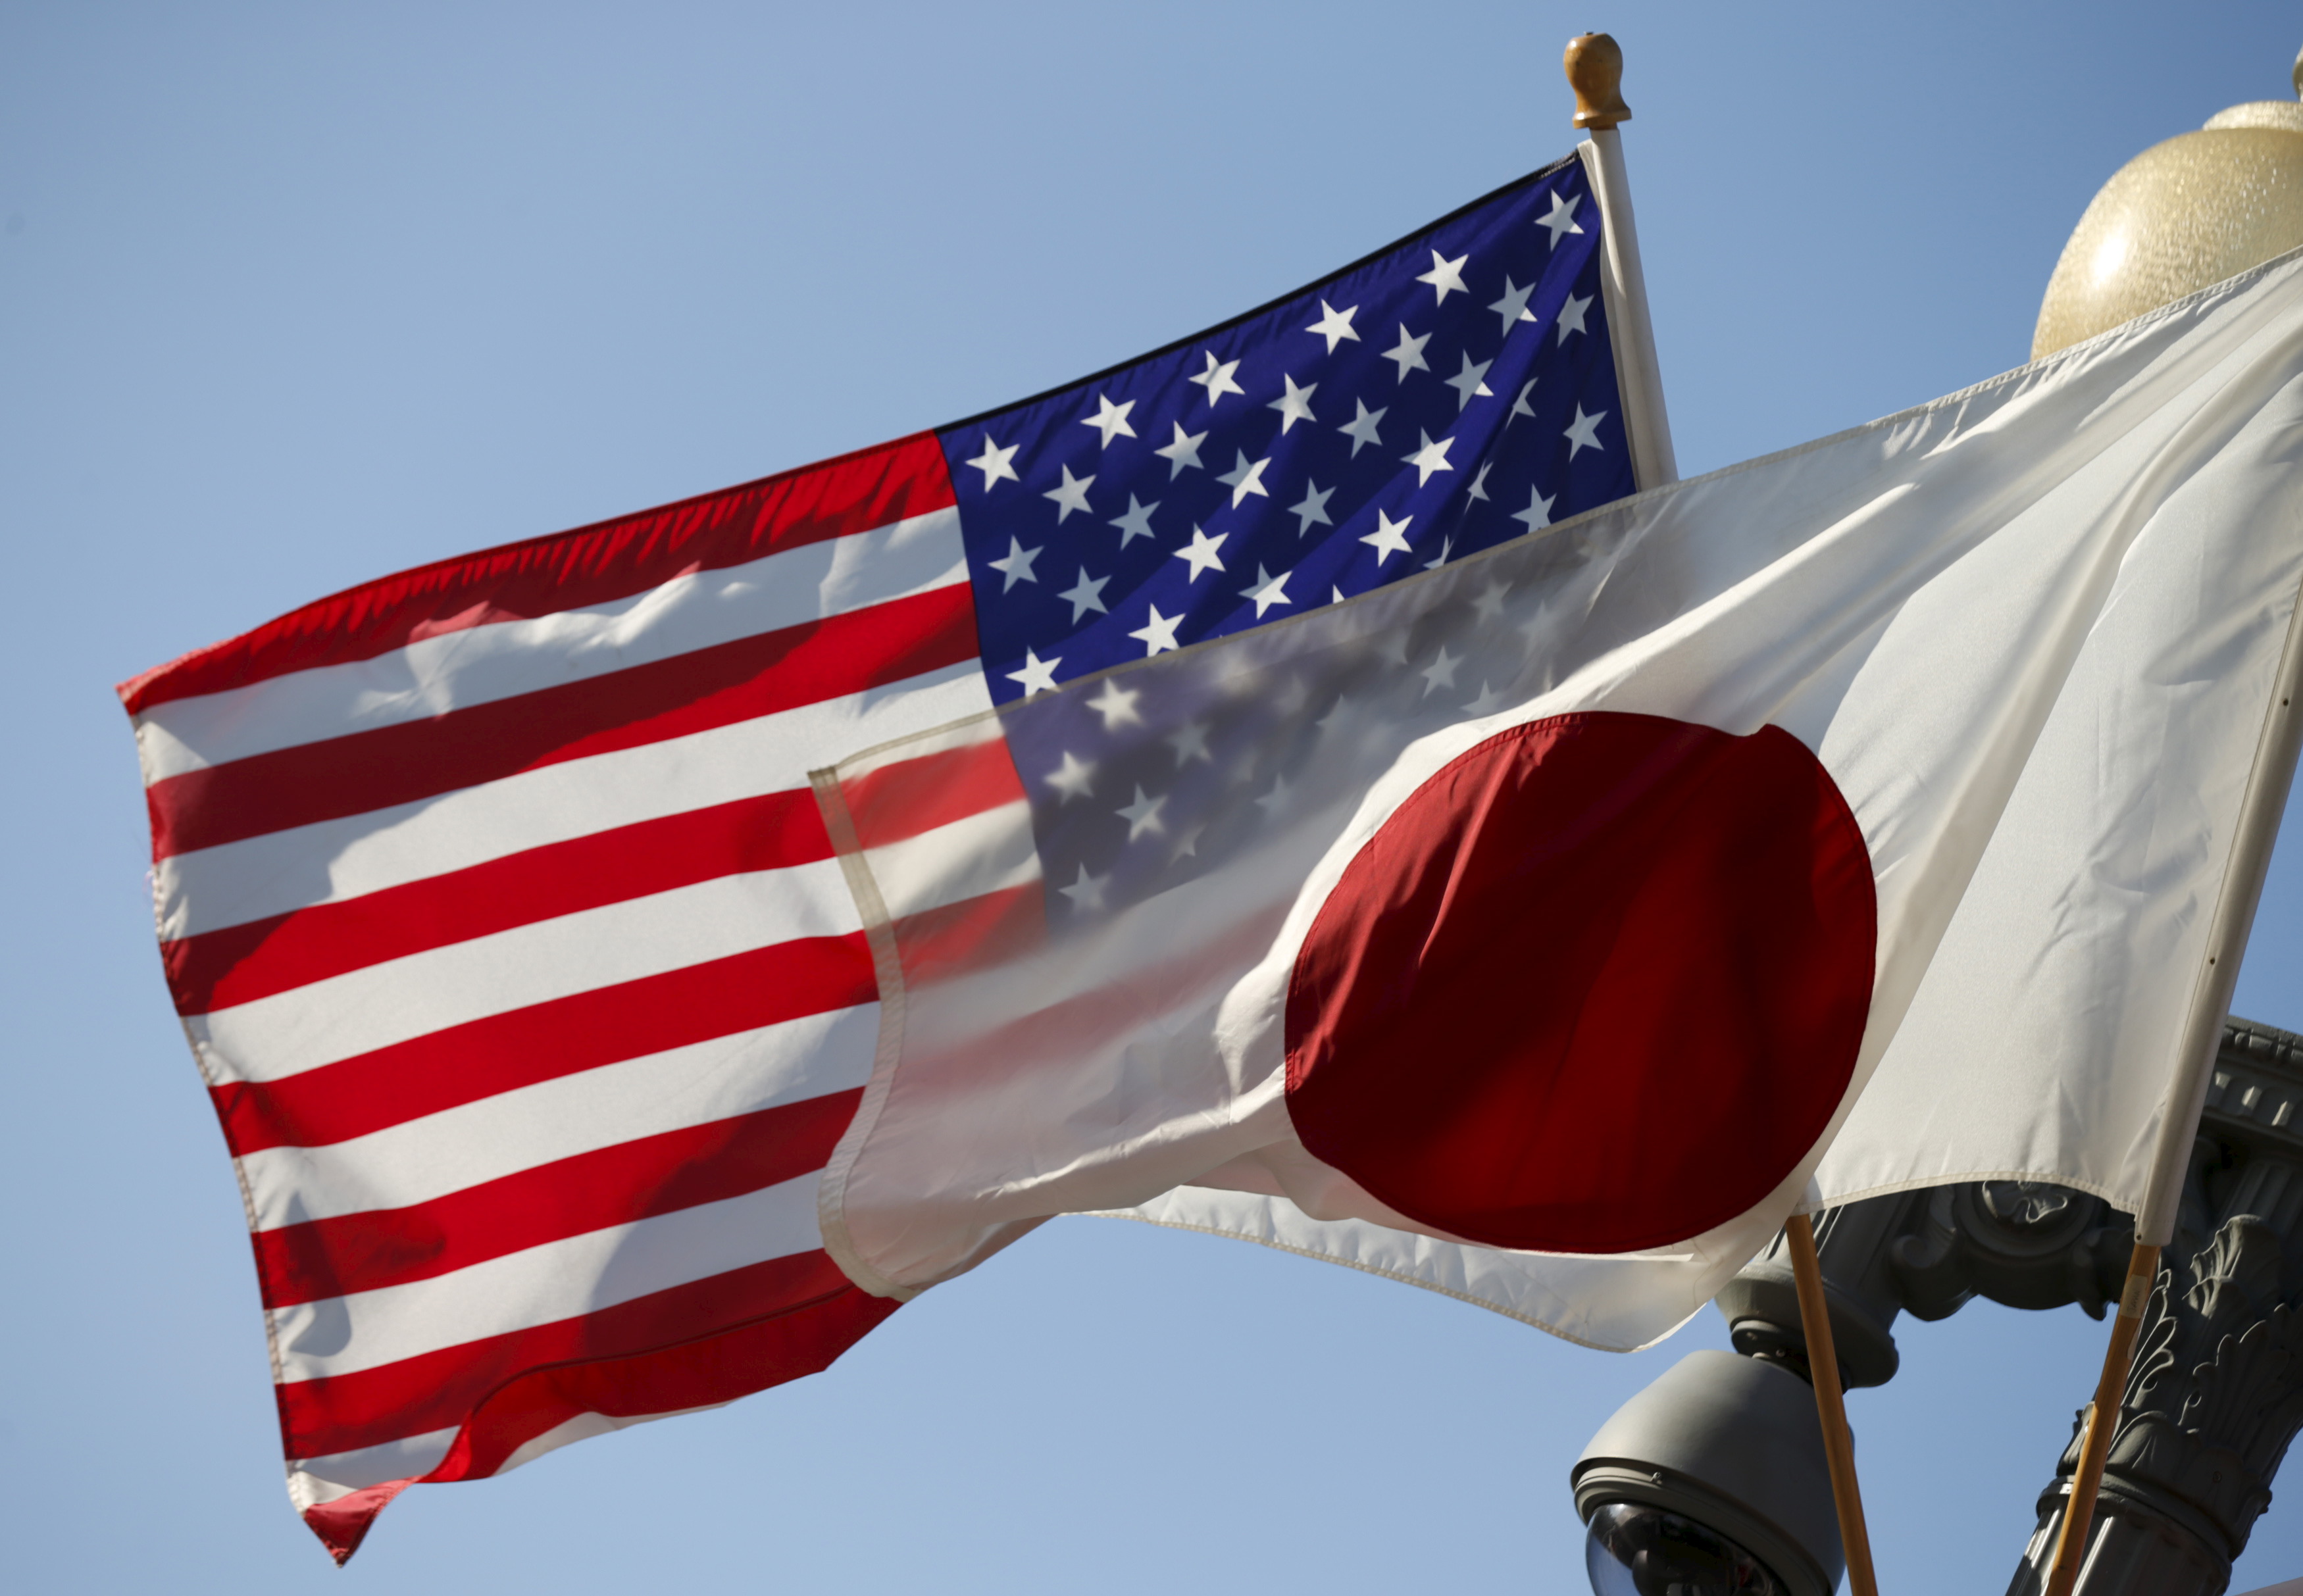 Japan and U.S. flags fly outside the White House in Washington